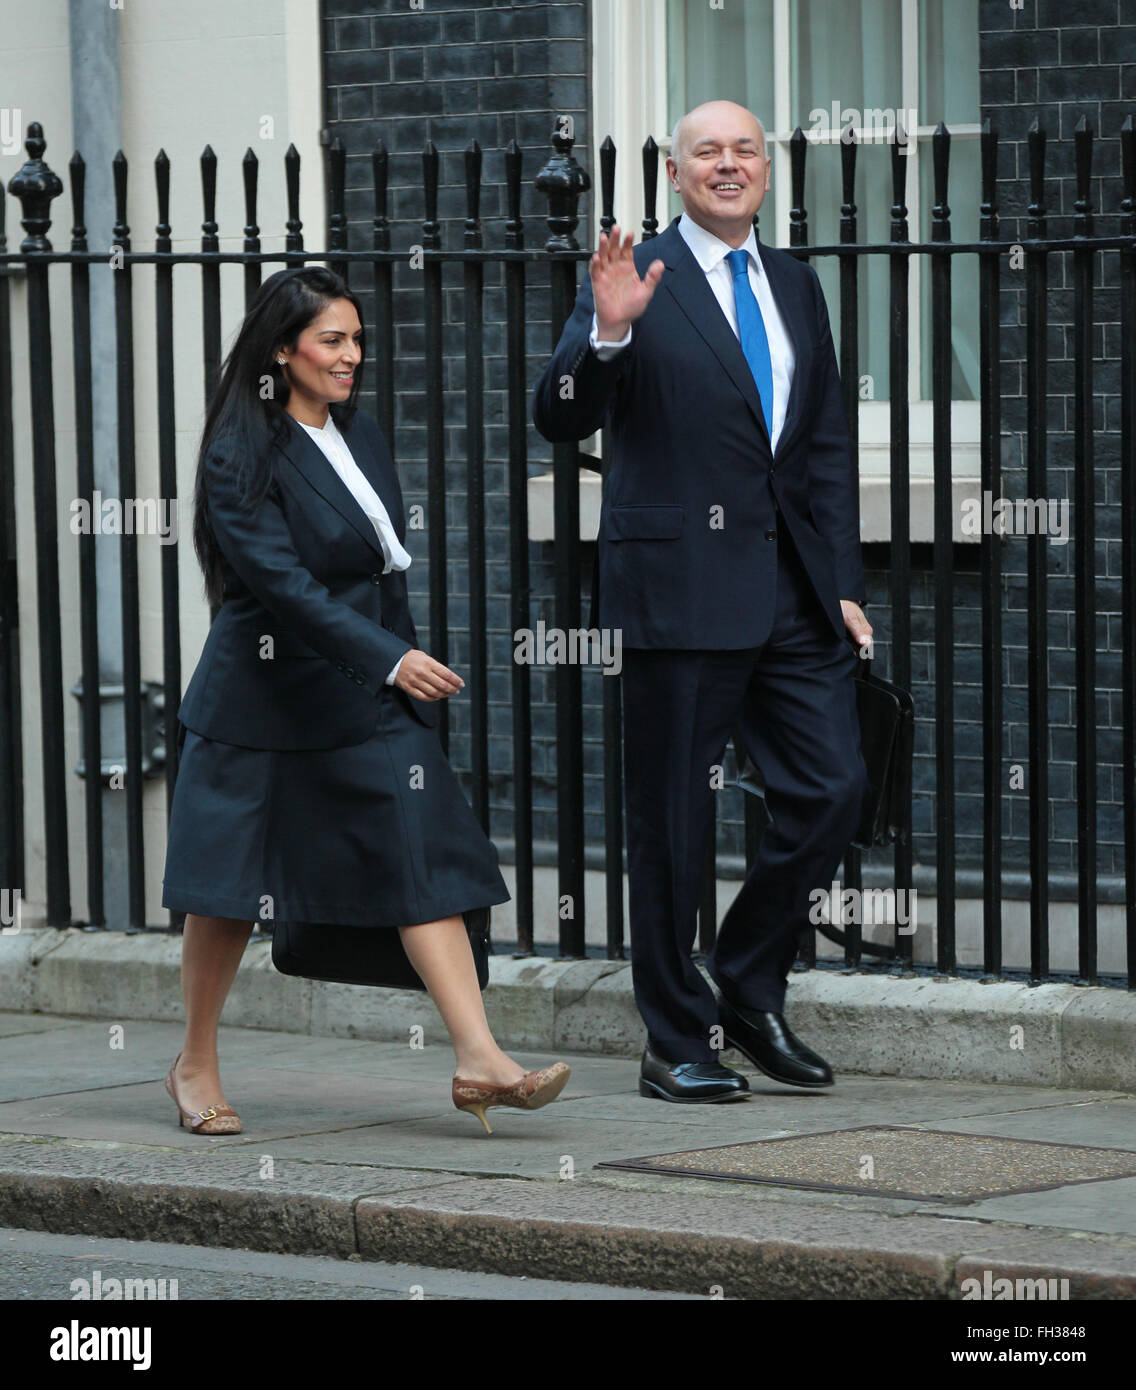 London, UK. 23rd February, 2016. Priti Patel and Iain Duncan Smith seen at Downing Street on Feb 23, 2016 in London Stock Photo